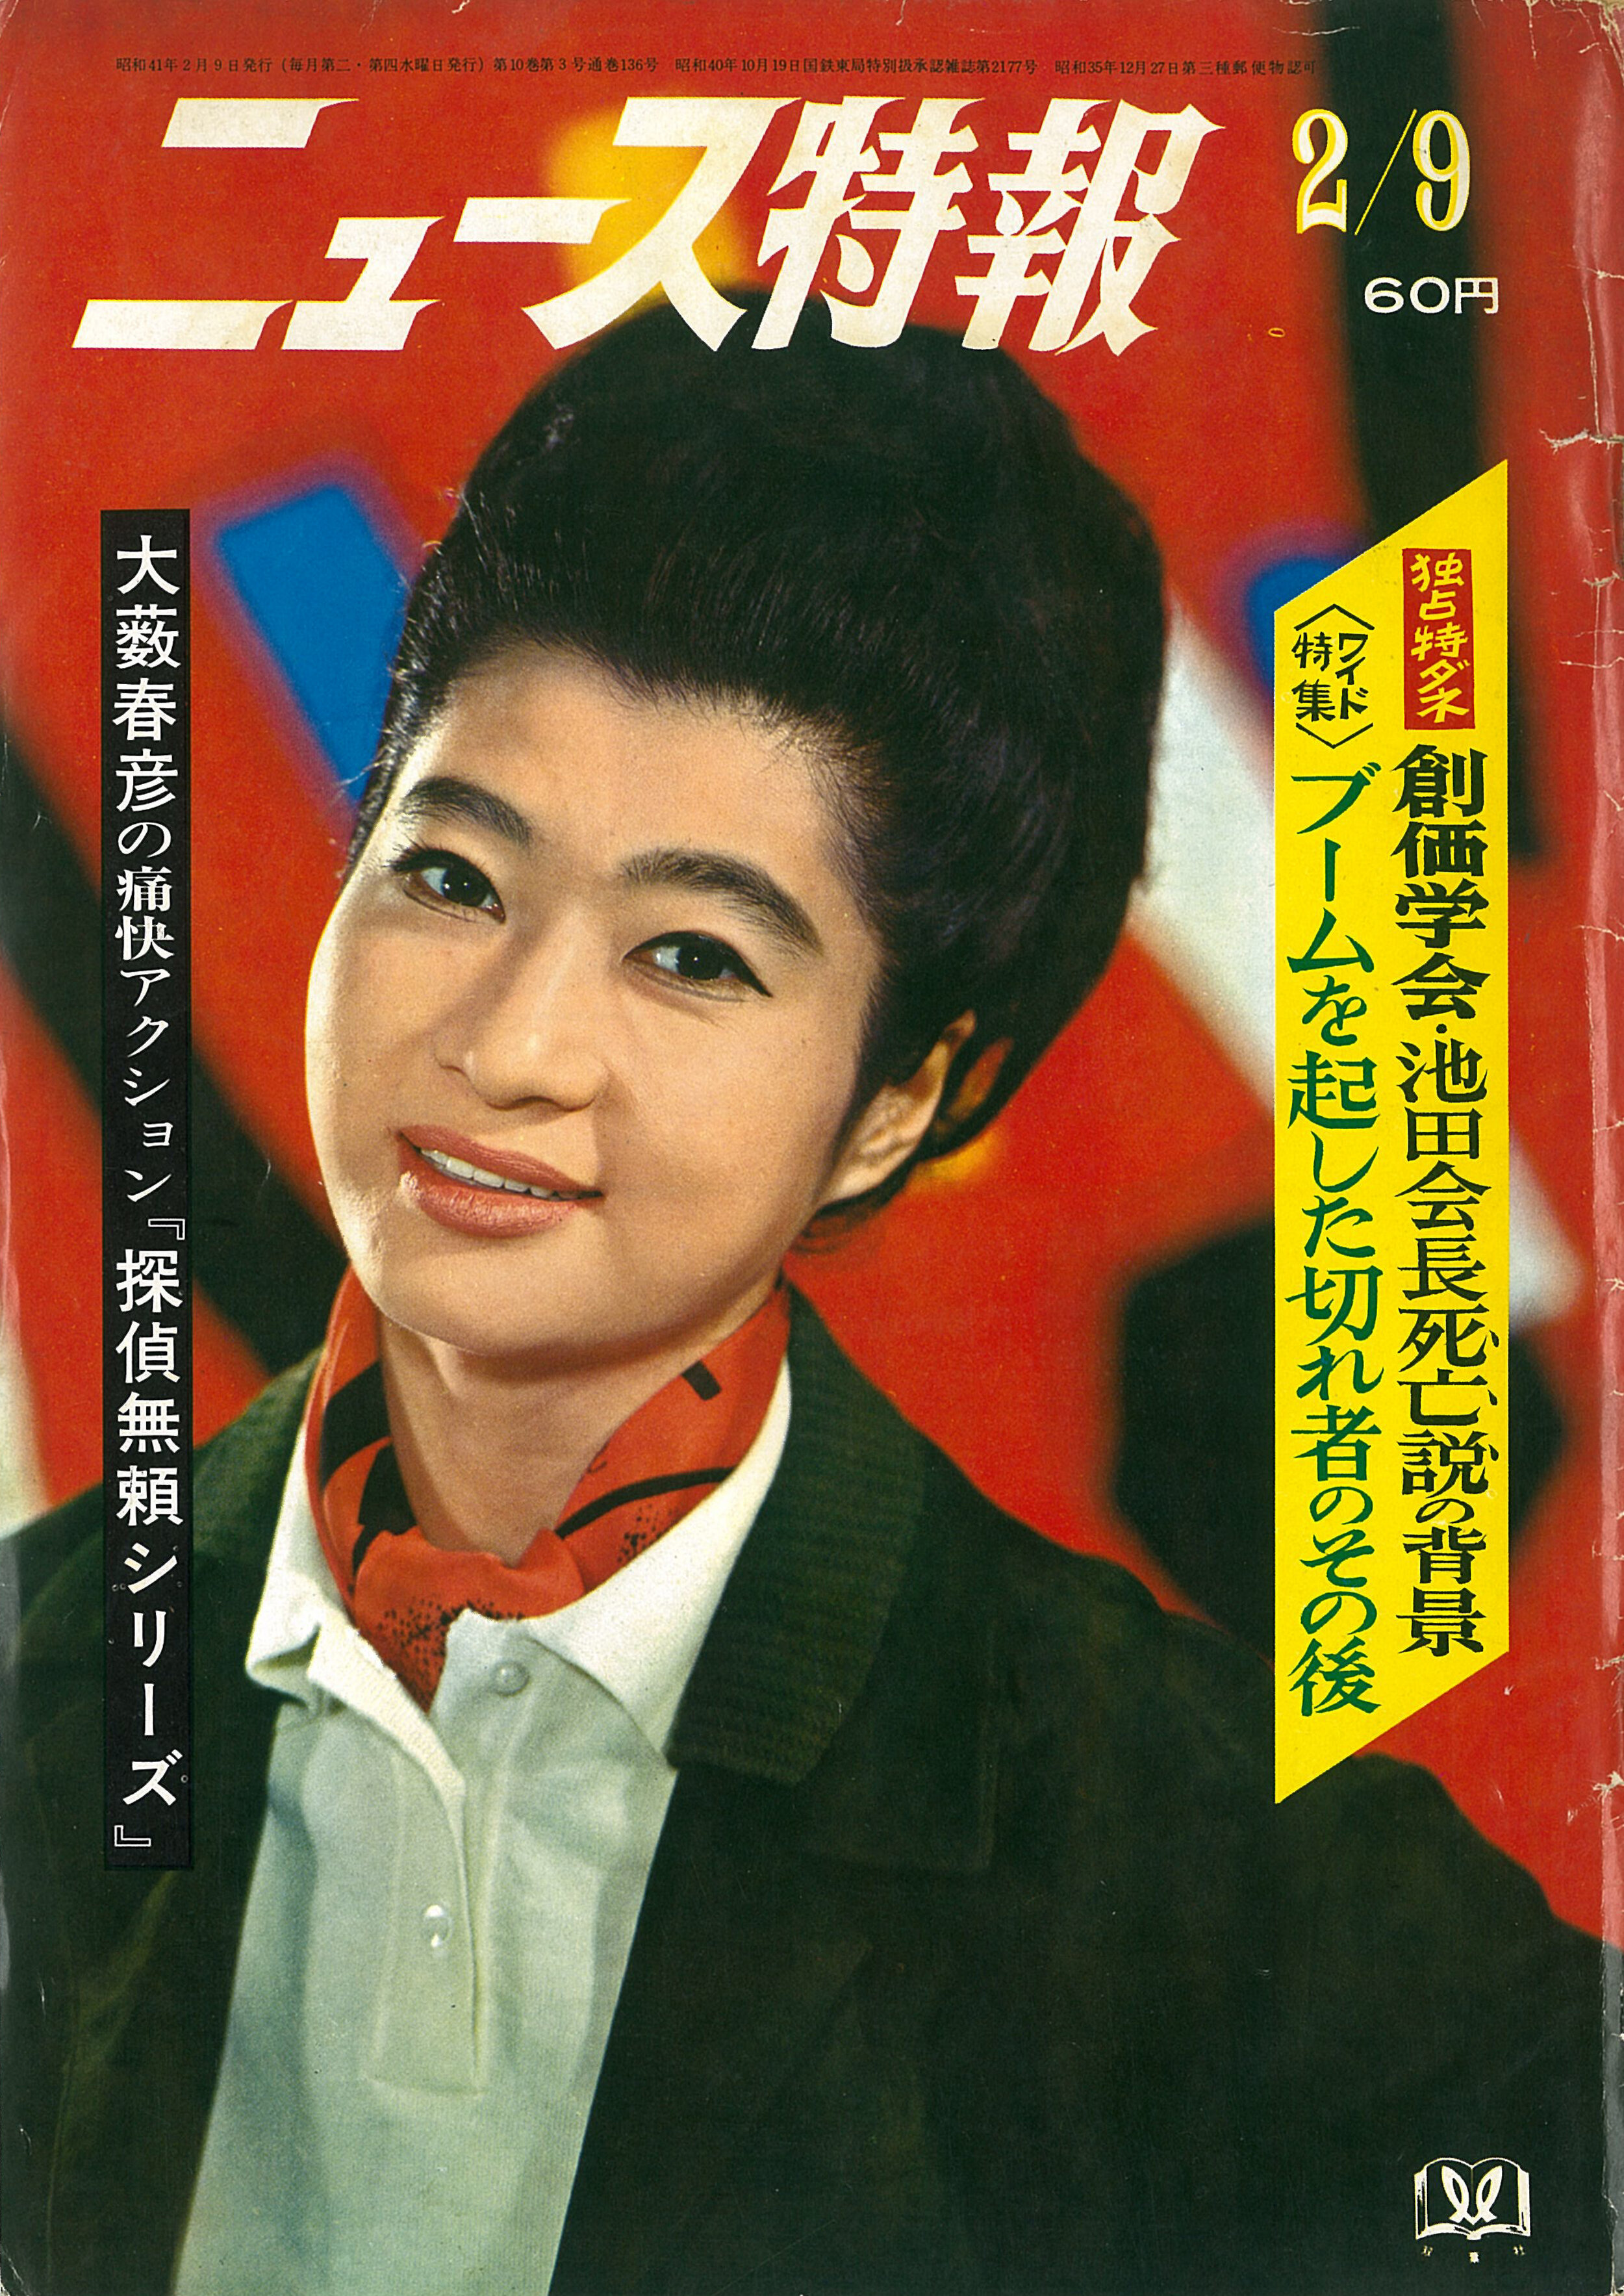  [fig. 3] News Tokuhō (Special news report), Futabasha, 1966. Collection of Aichi Prefectural Museum of Art 